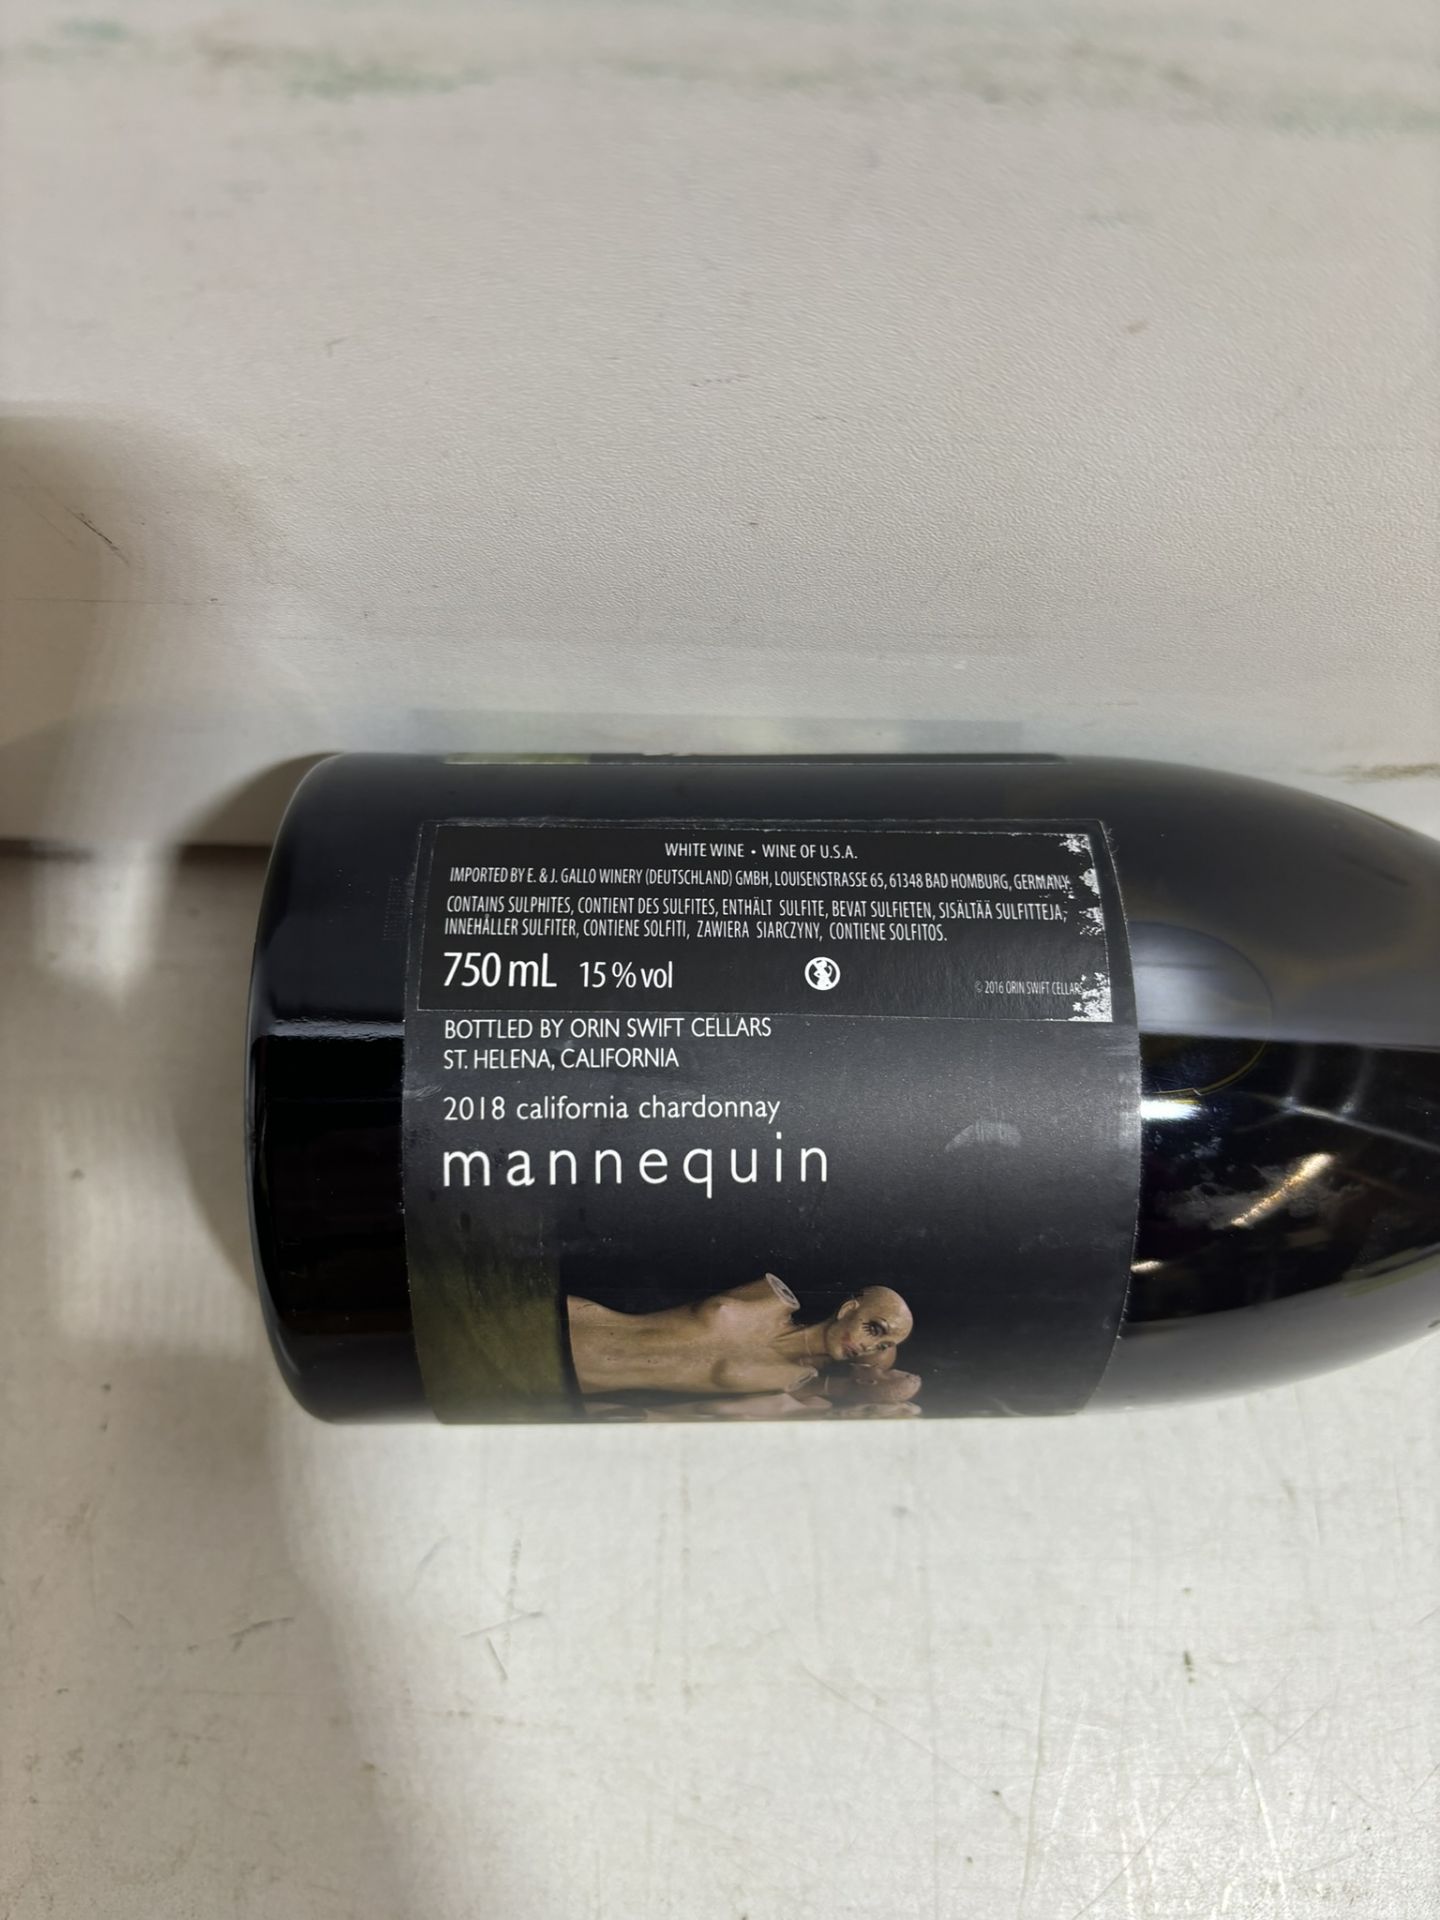 6 X Bottles Of Orin Swift Mannequin 2018 California Chardonnay 75Cl - Image 2 of 3